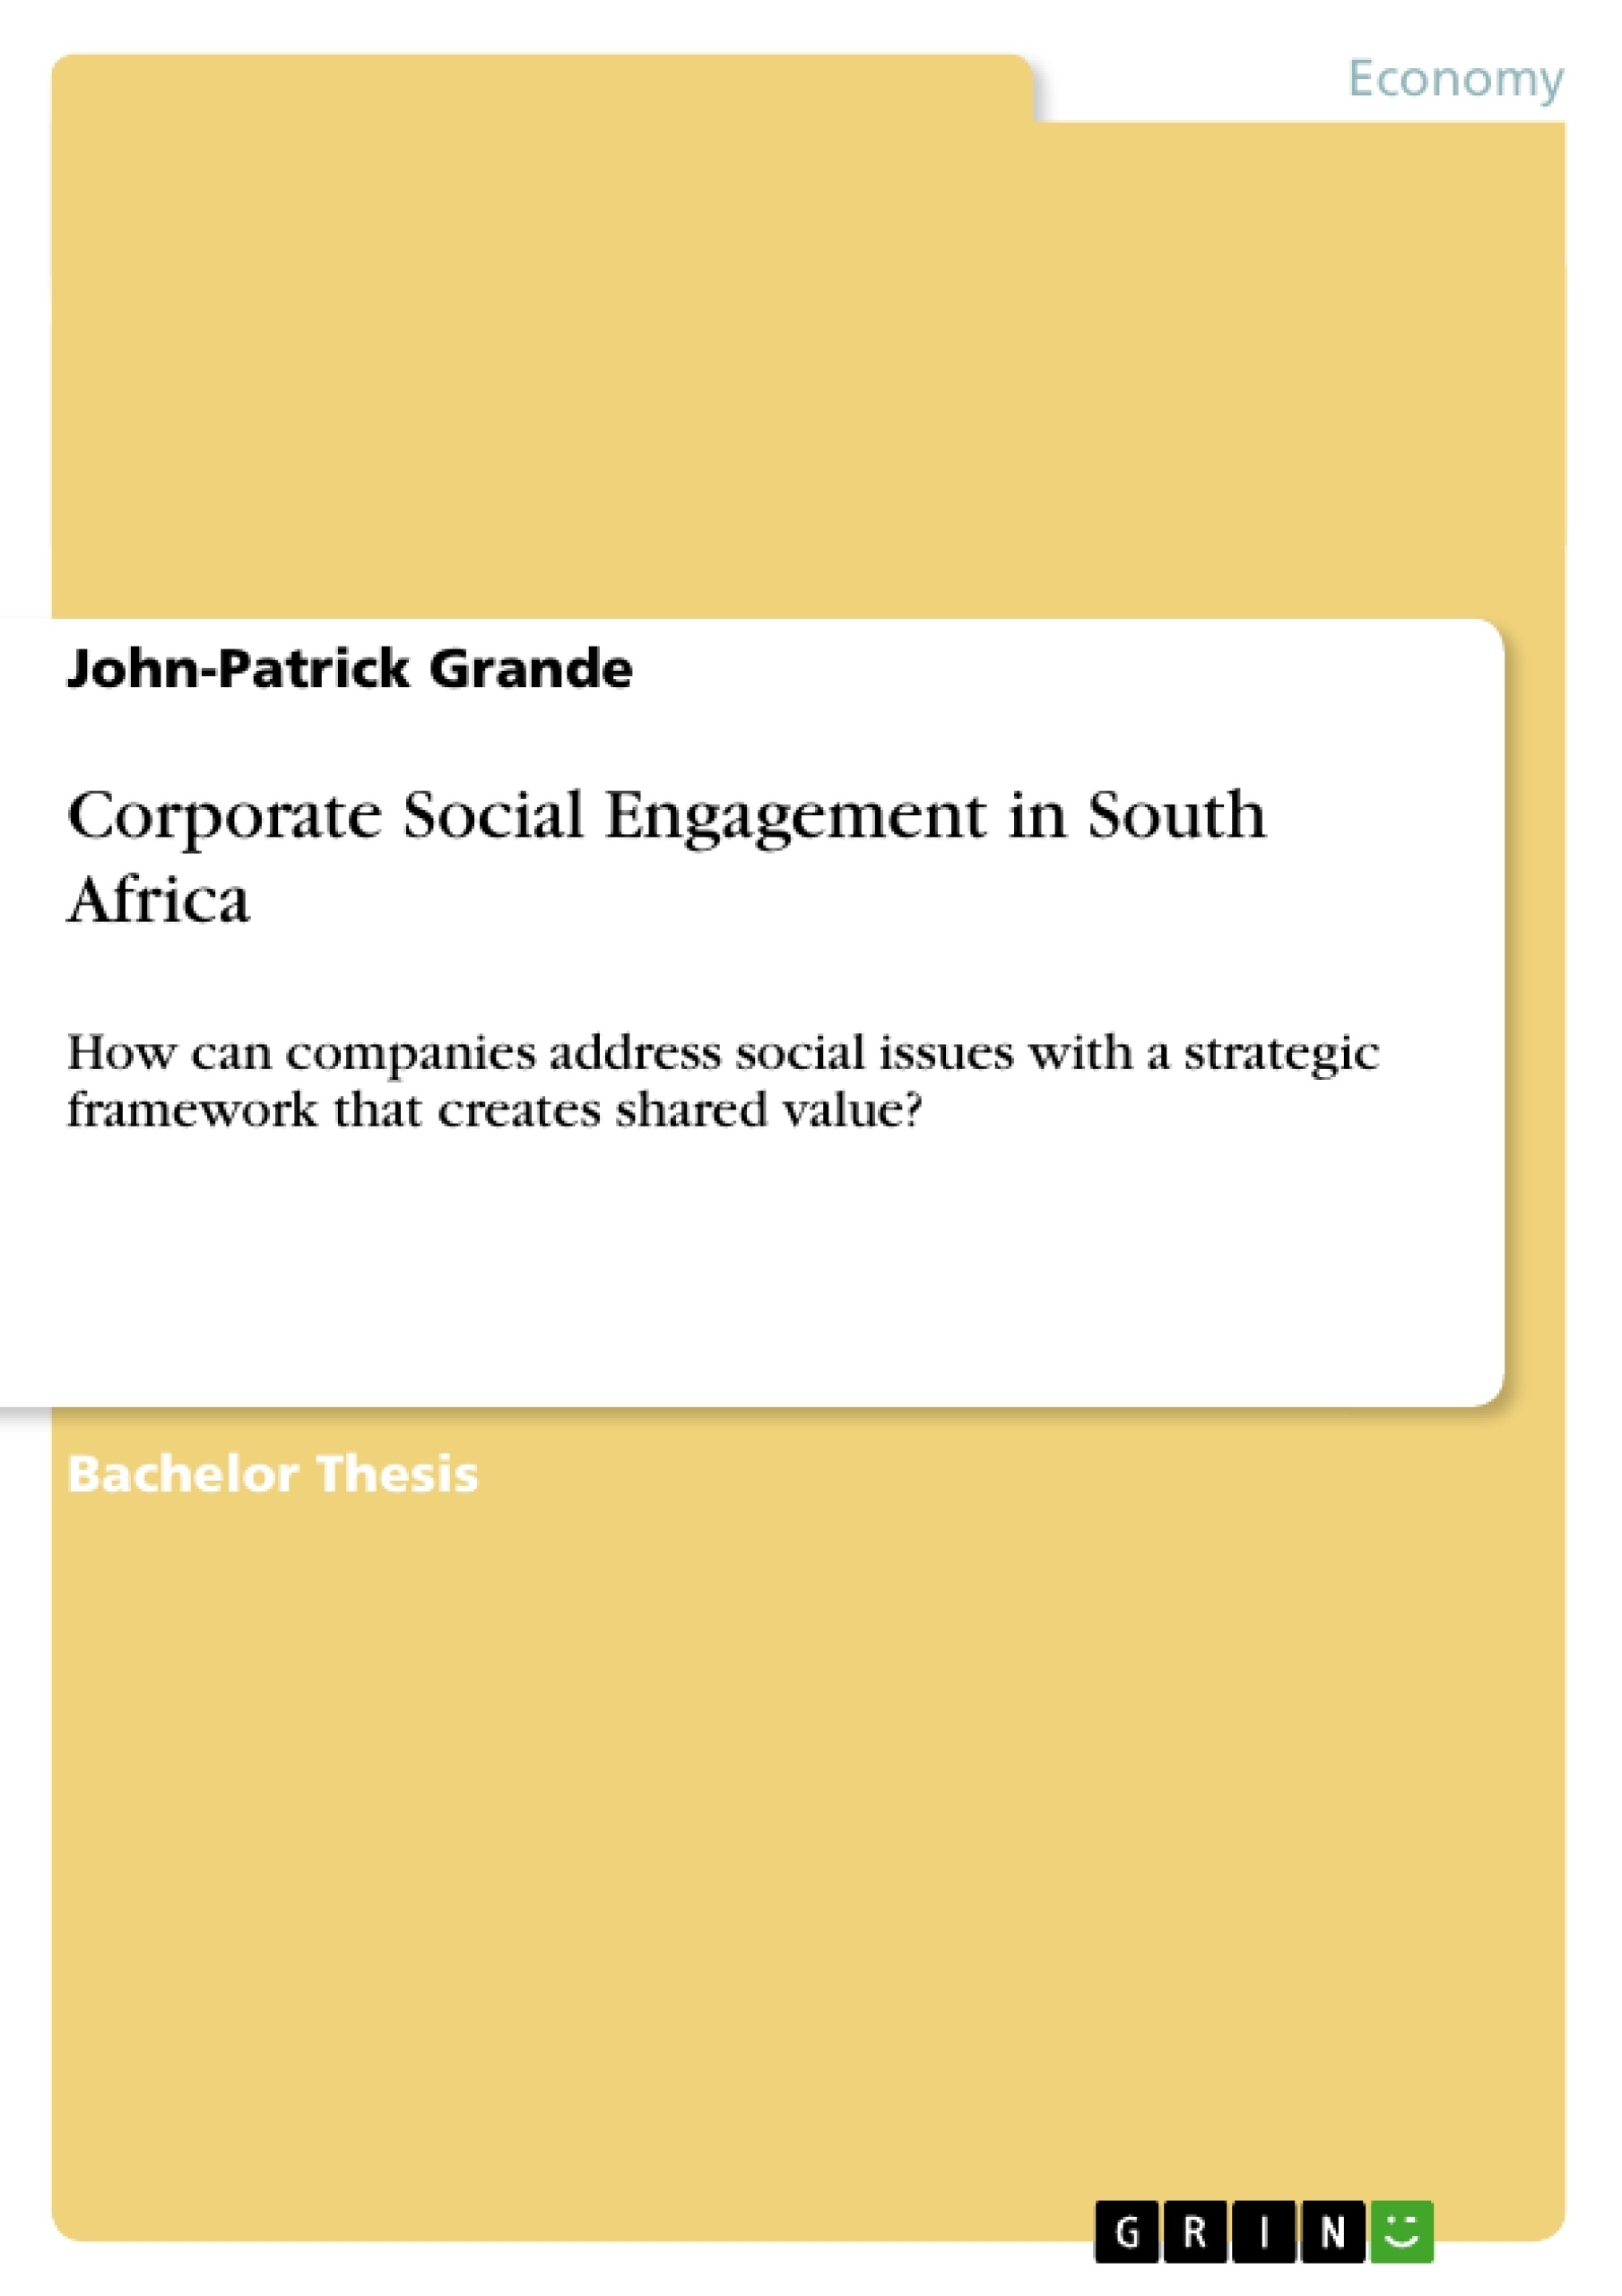 Título: Corporate Social Engagement in South Africa